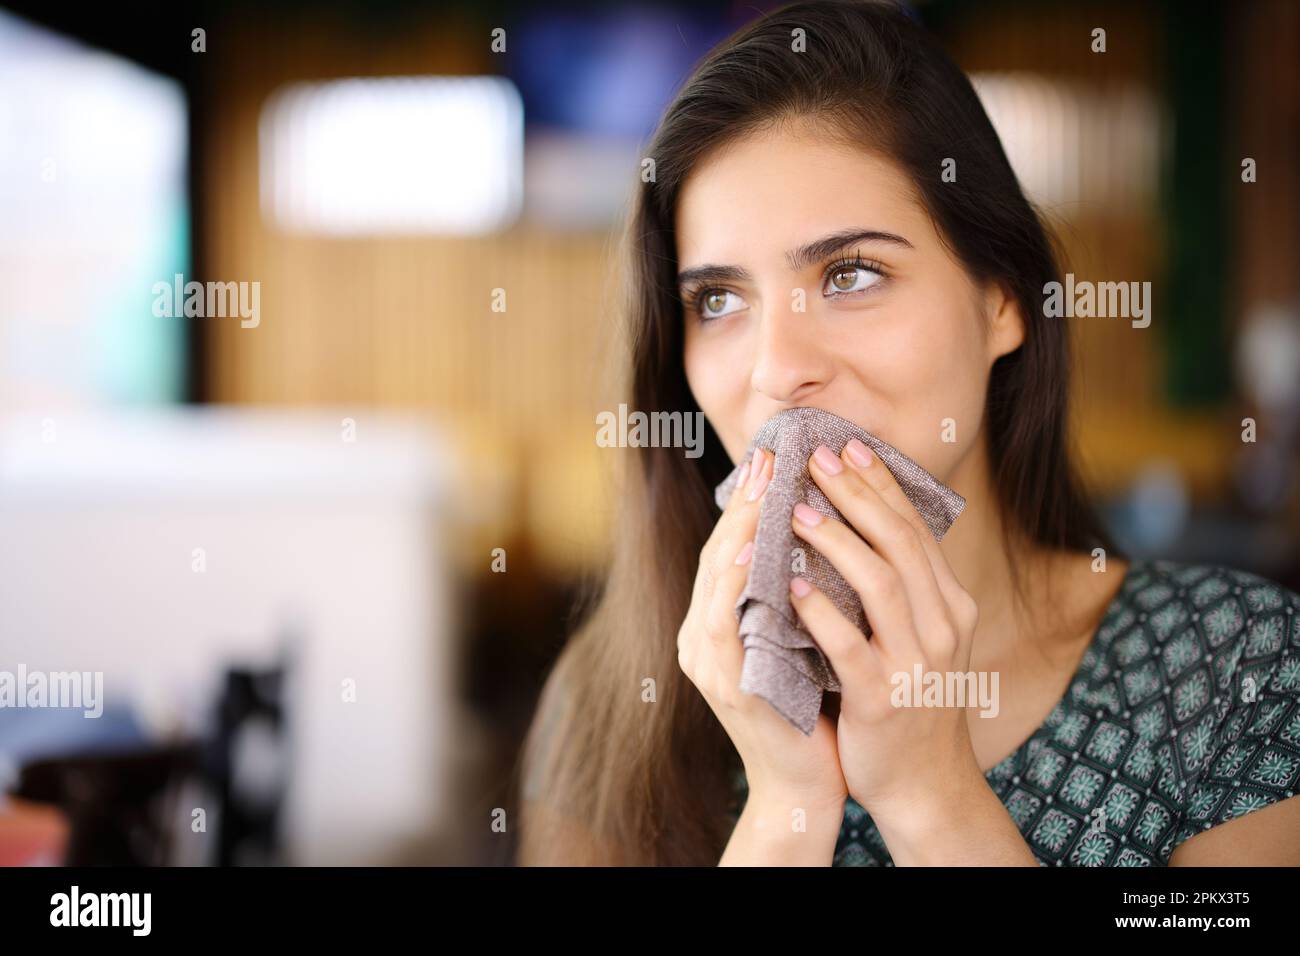 Woman cleaning mouth with napkin sitting in a restaurant looking away Stock Photo